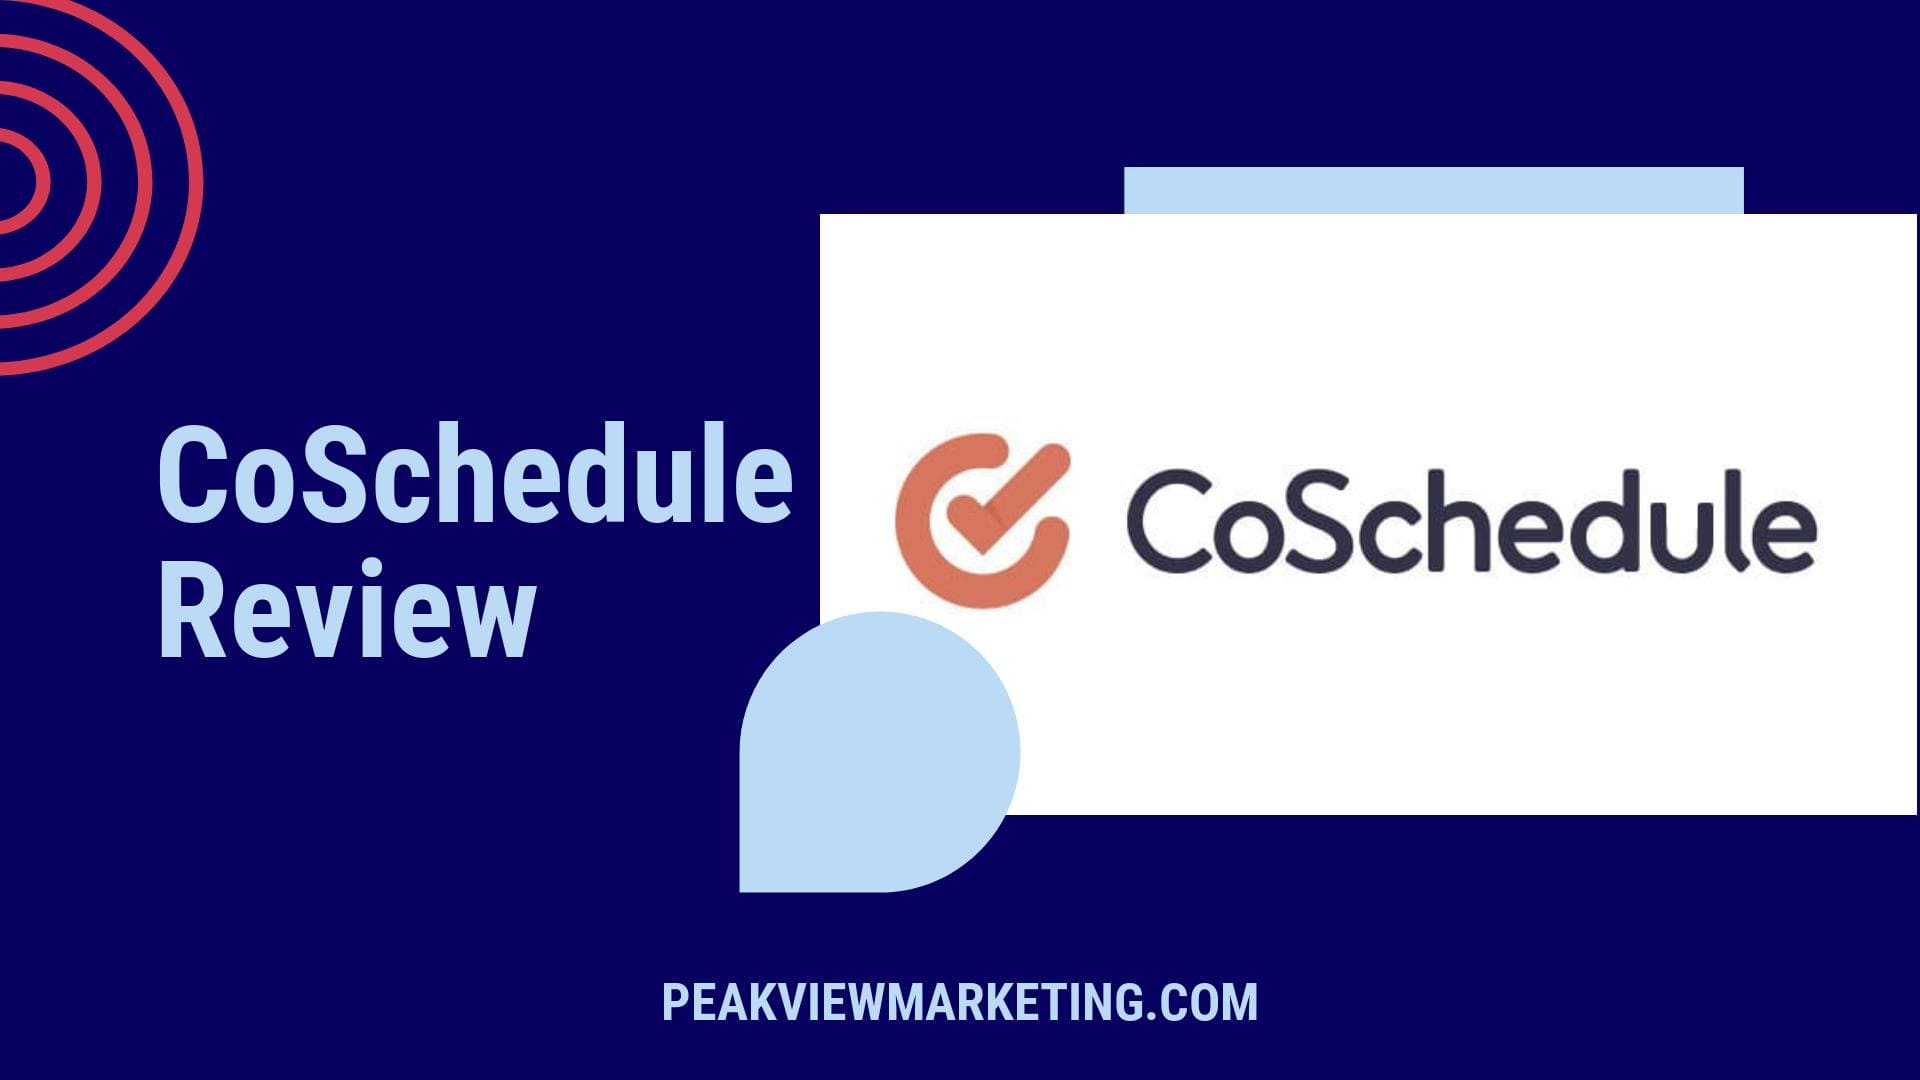 CoSchedule Review Image